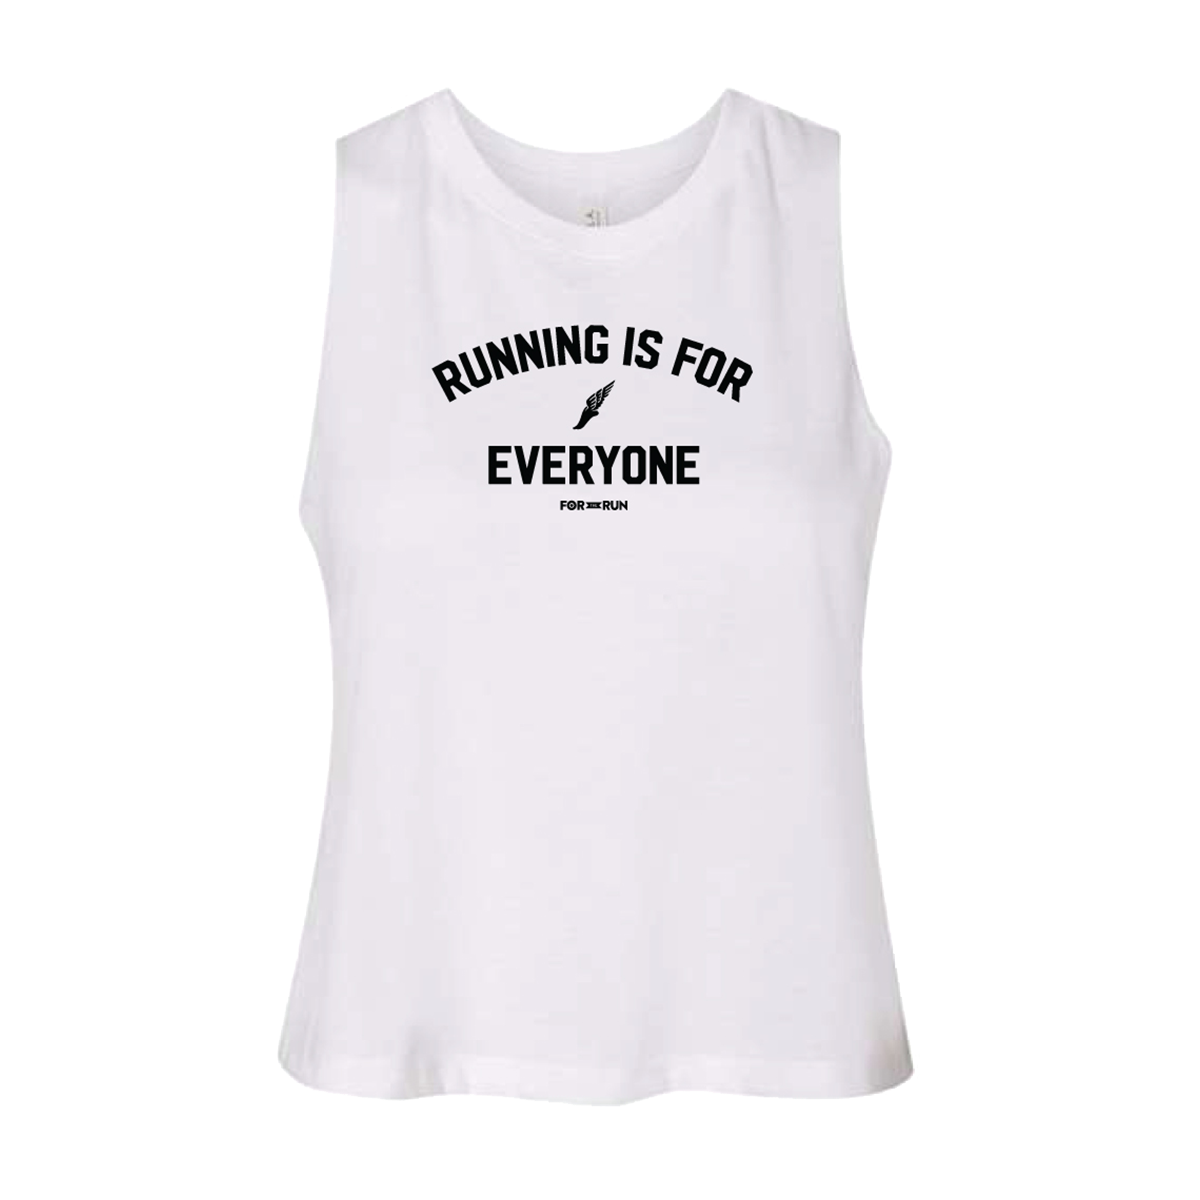 Running Is For Everyone - Women's